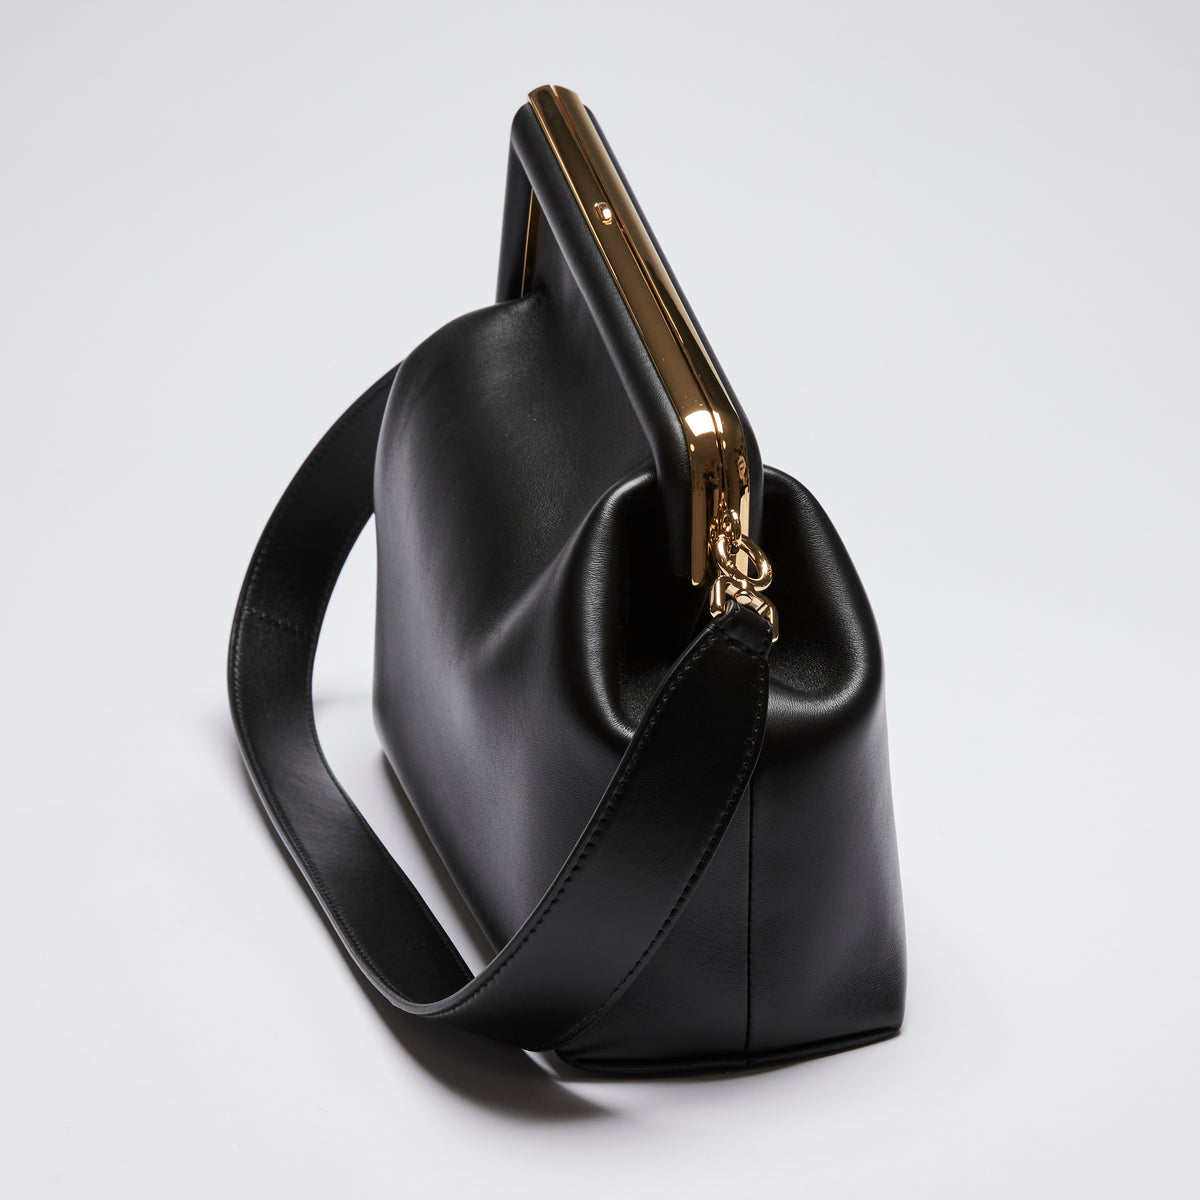 Excellent Pre-Loved Black Smooth Leather Asymmetrical Clutch Bag.(side)